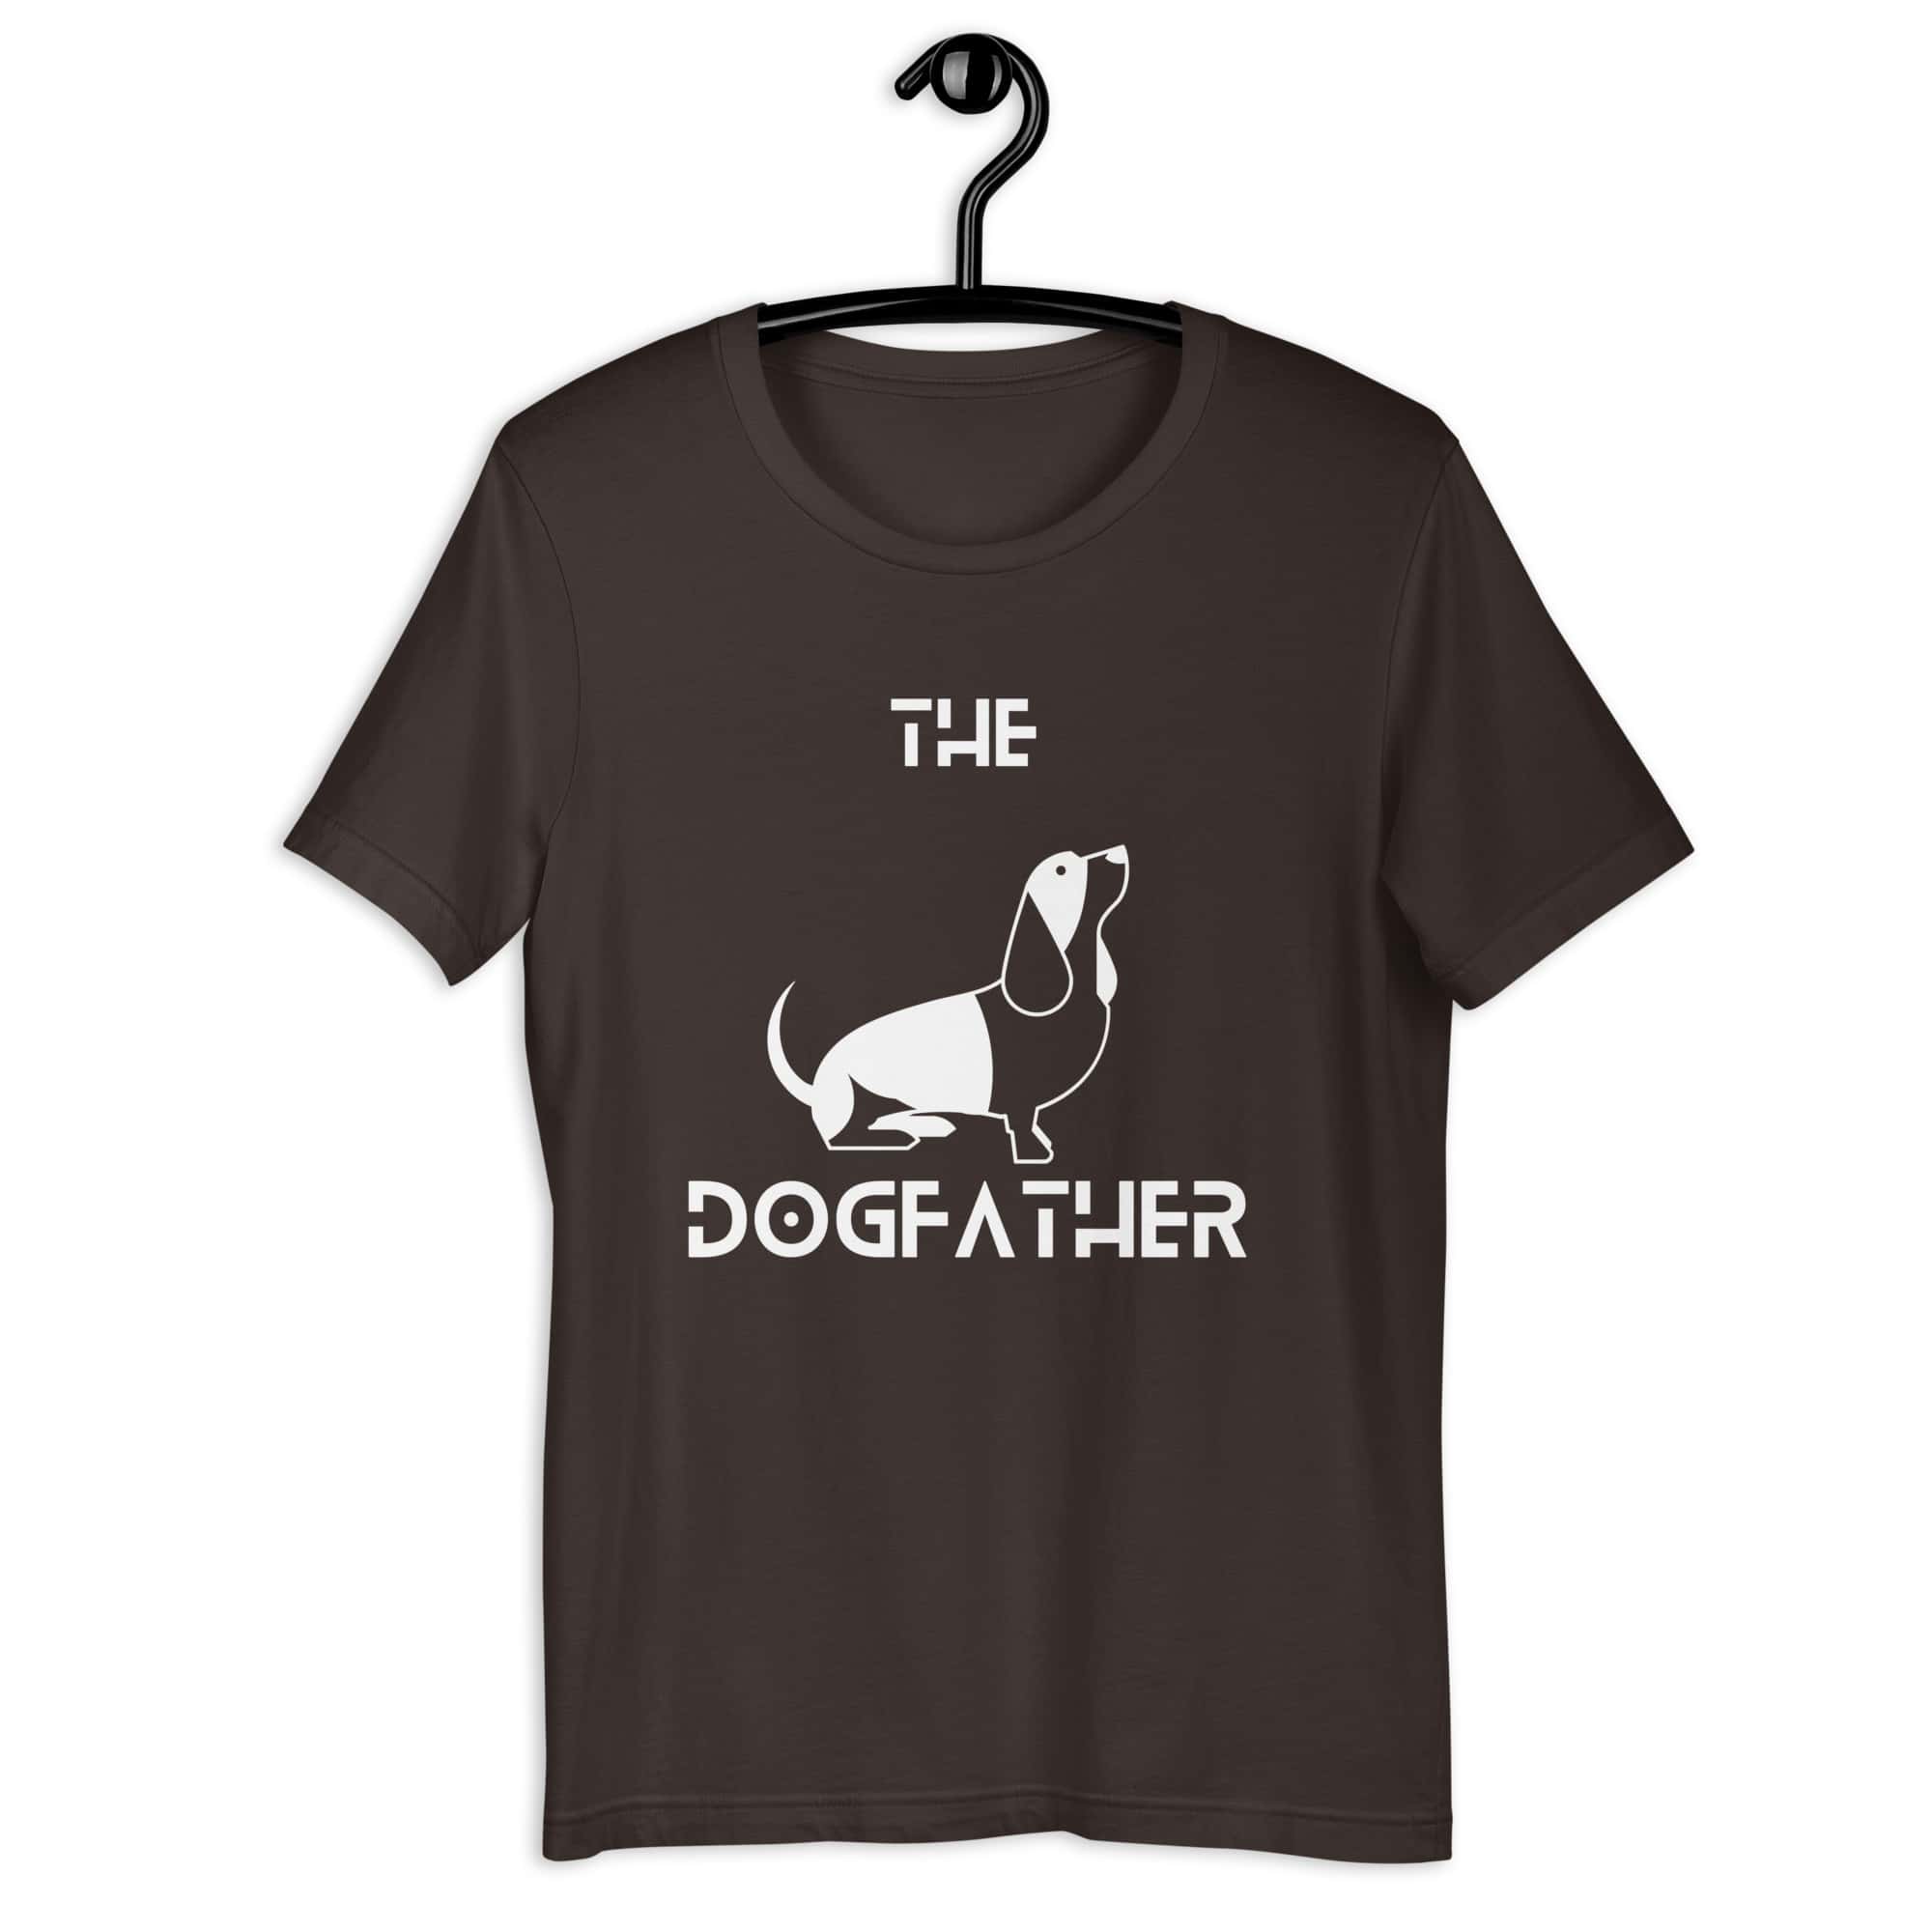 The Dogfather Hounds Unisex T-Shirt. Brown